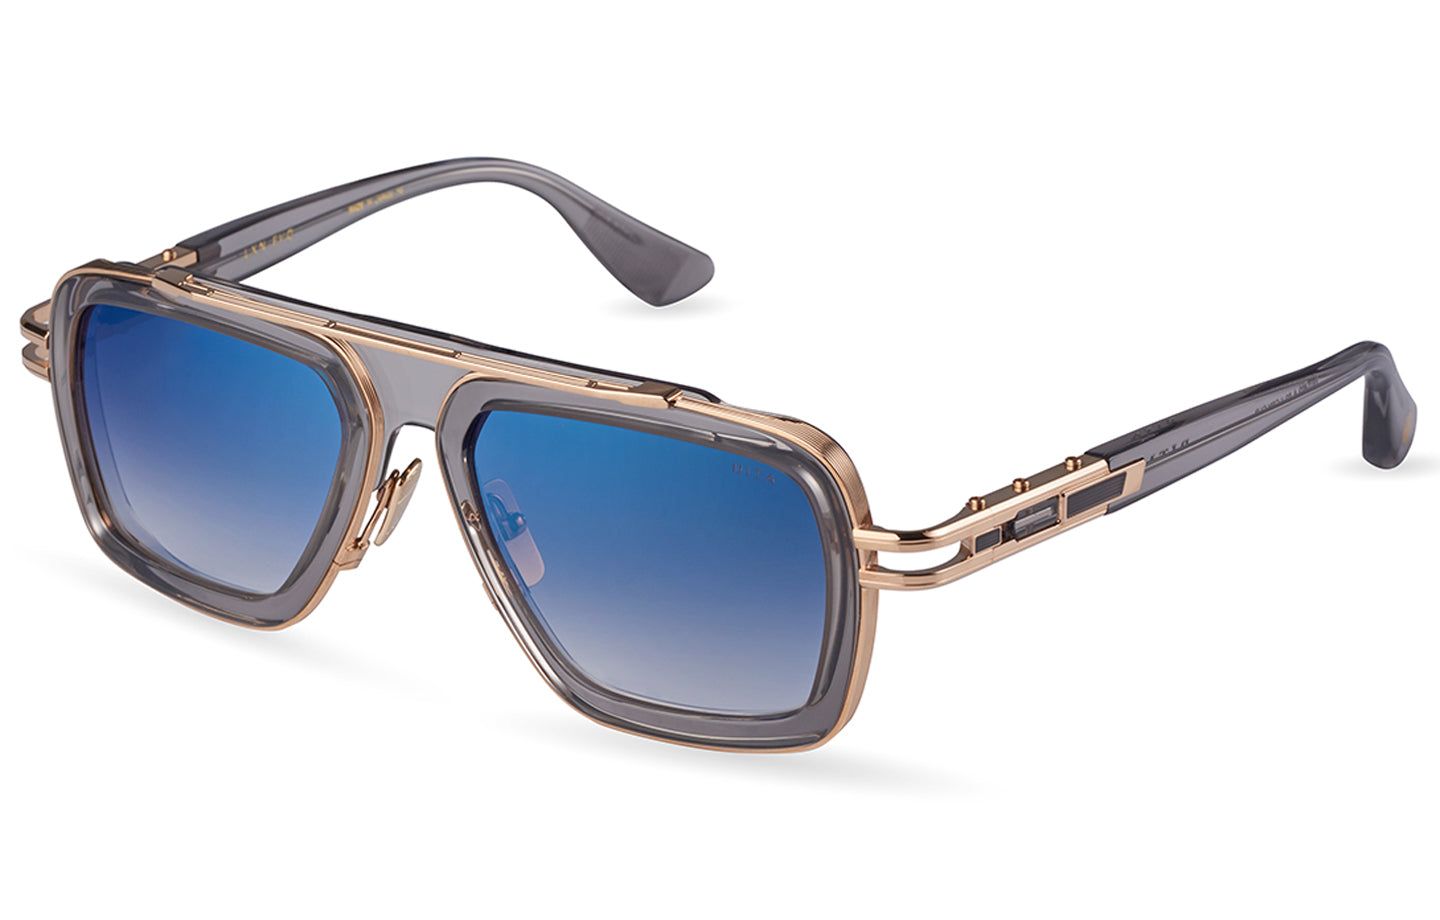 Latest Sunglasses Innovations: What's New in Eyewear Tech – SOJOS